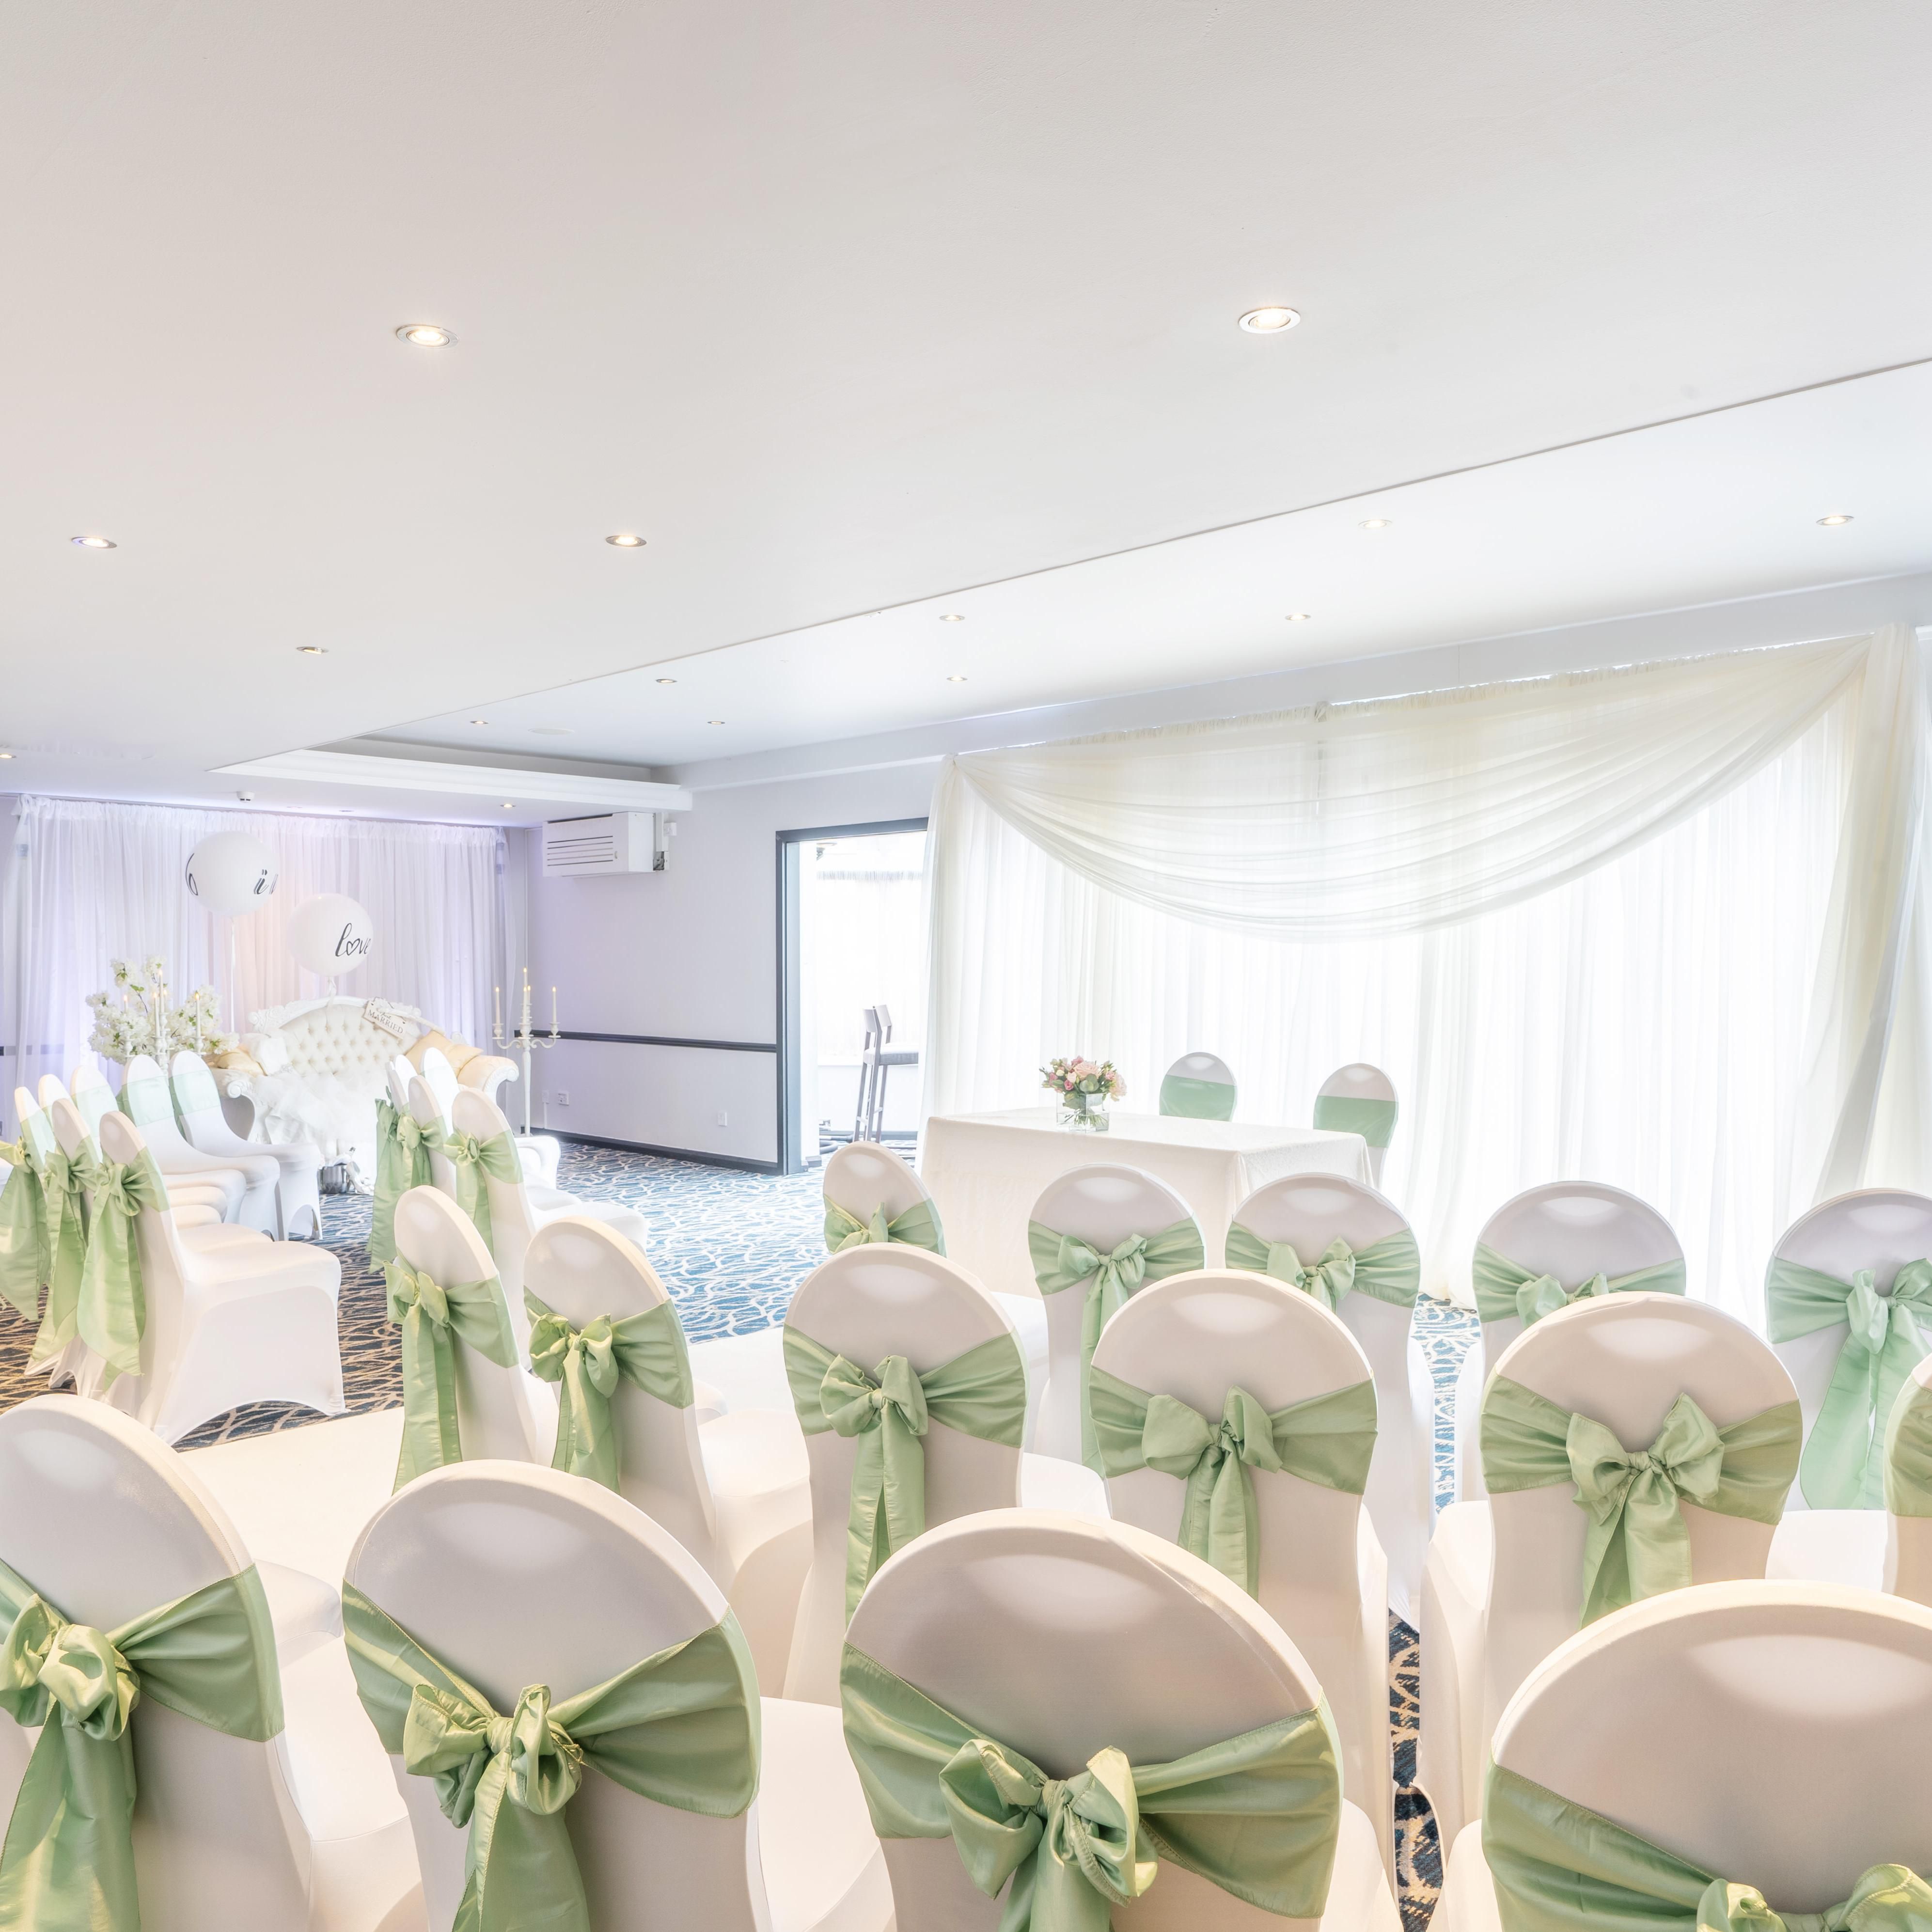 Willow suite dressed for a wedding ceremony